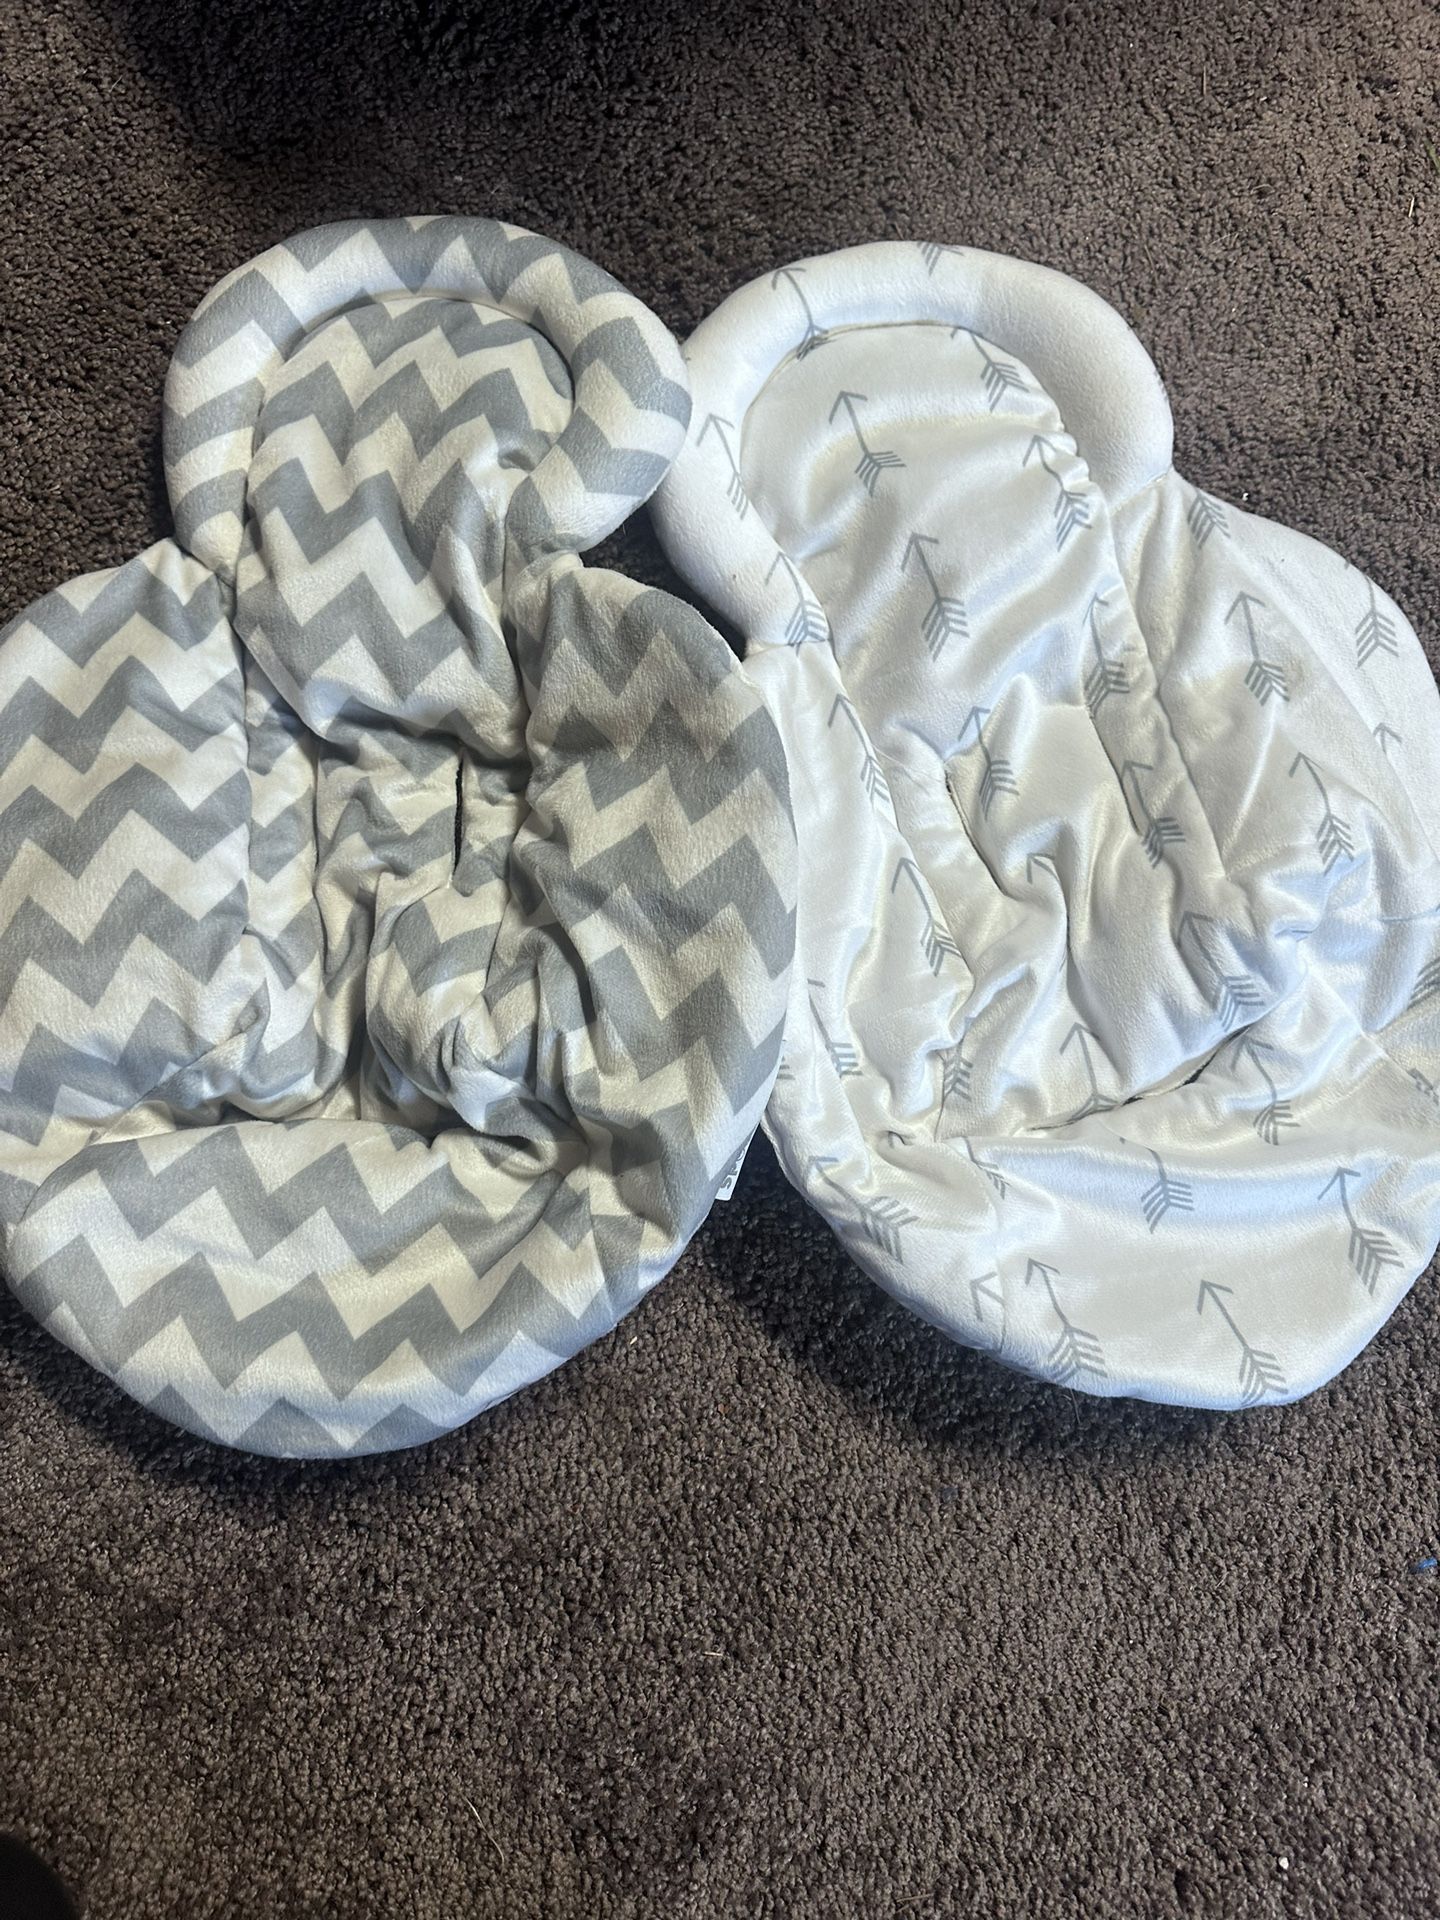 Infant Inserts For Baby Swing